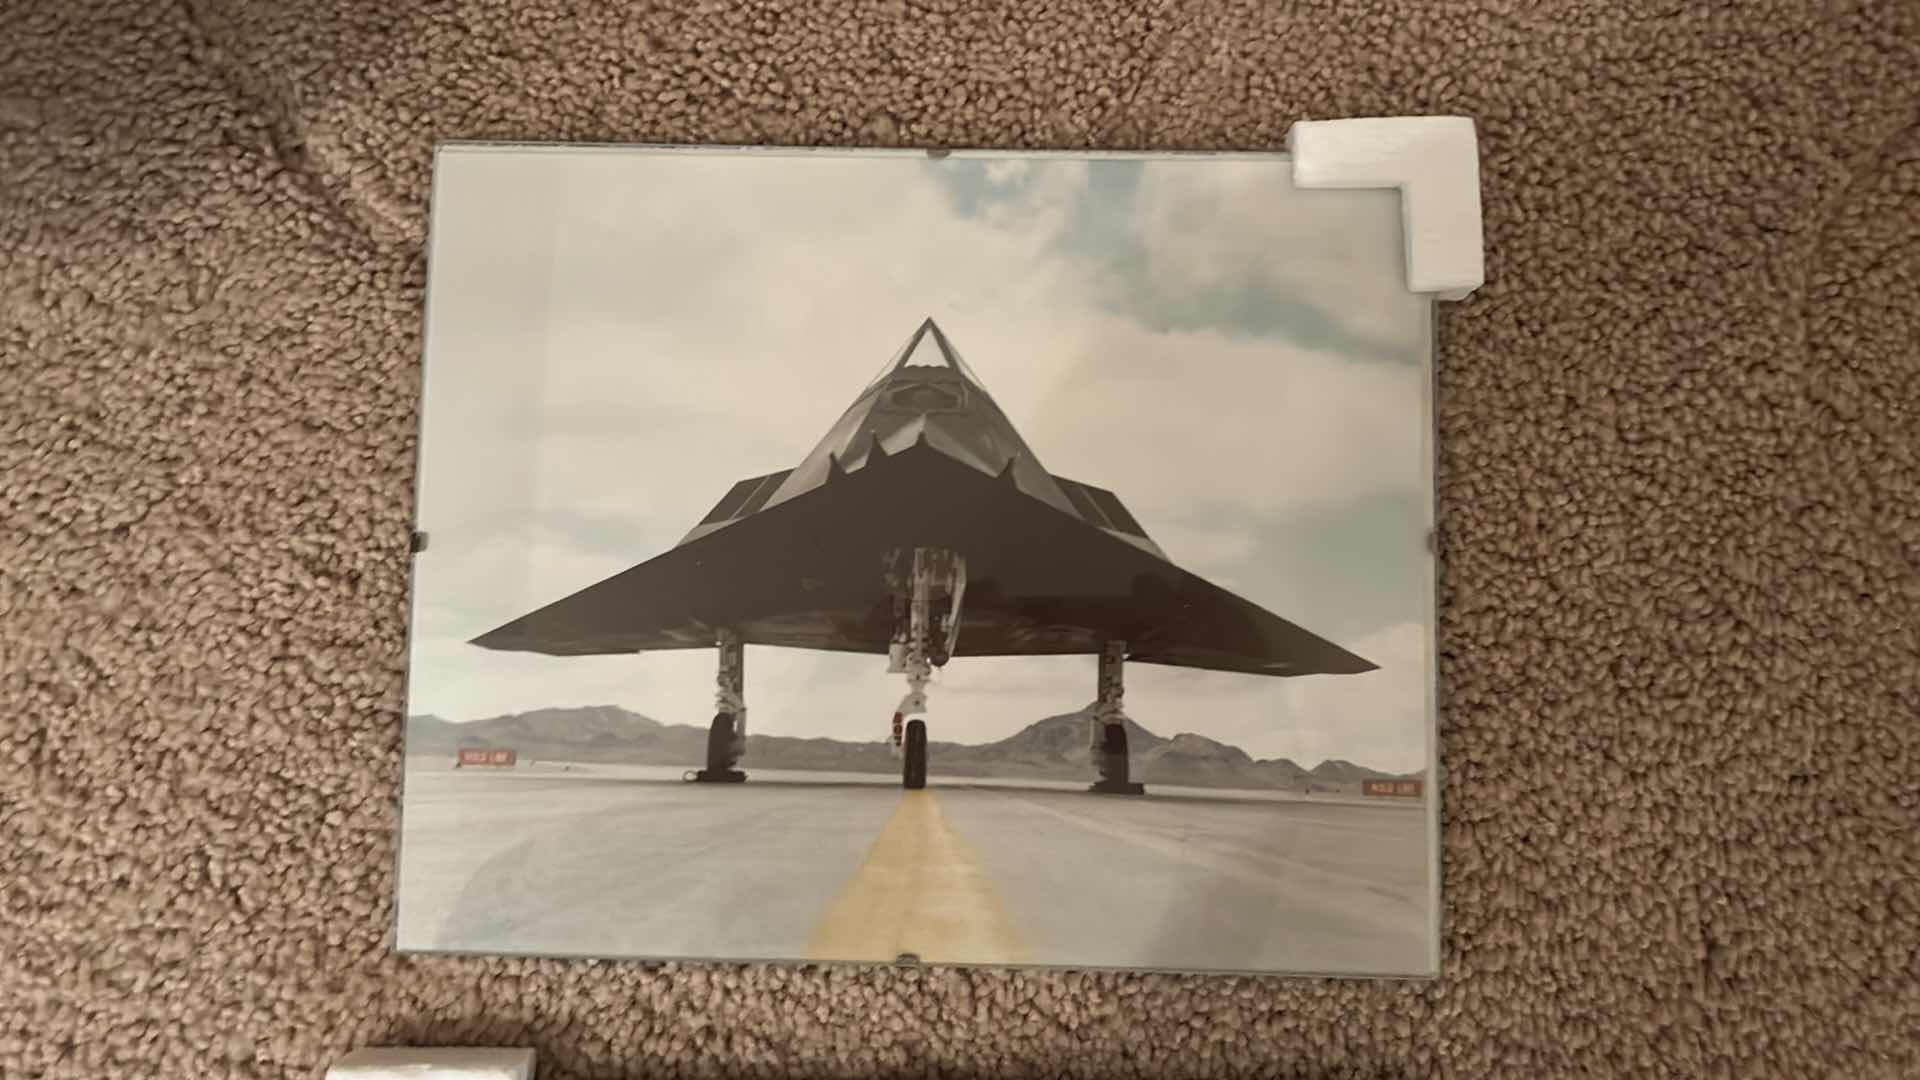 Photo 2 of 3 PHOTOS - STEALTH FIGHTER JET AVIATION AIRCRAFT 10” x 8”